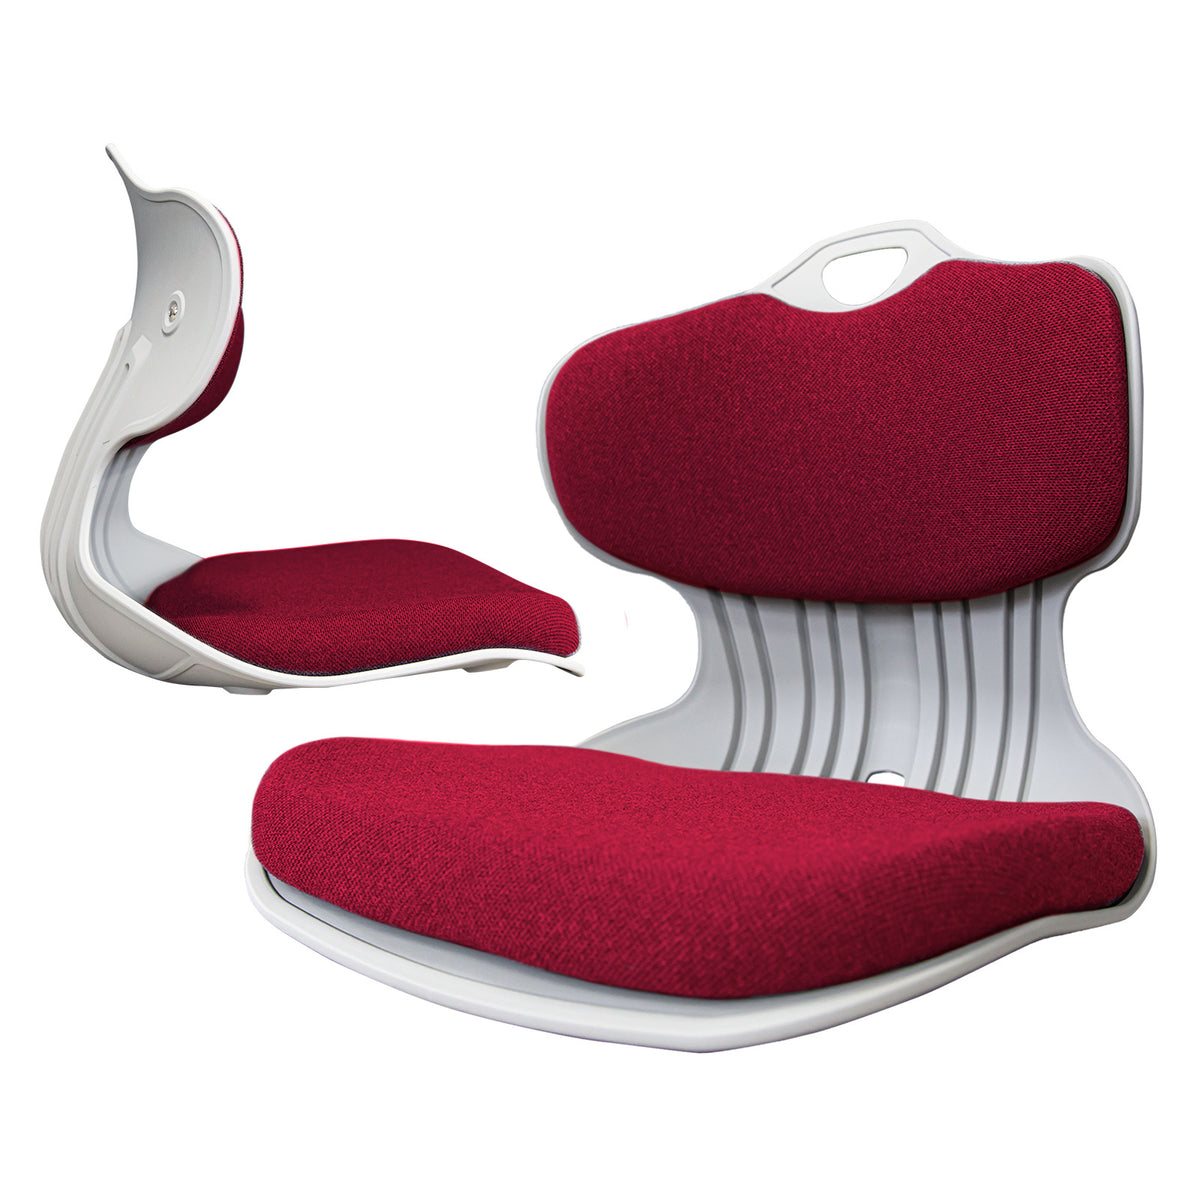 Samgong Posture Correction Slender Chair in Red Set - 2 Pieces - Notbrand